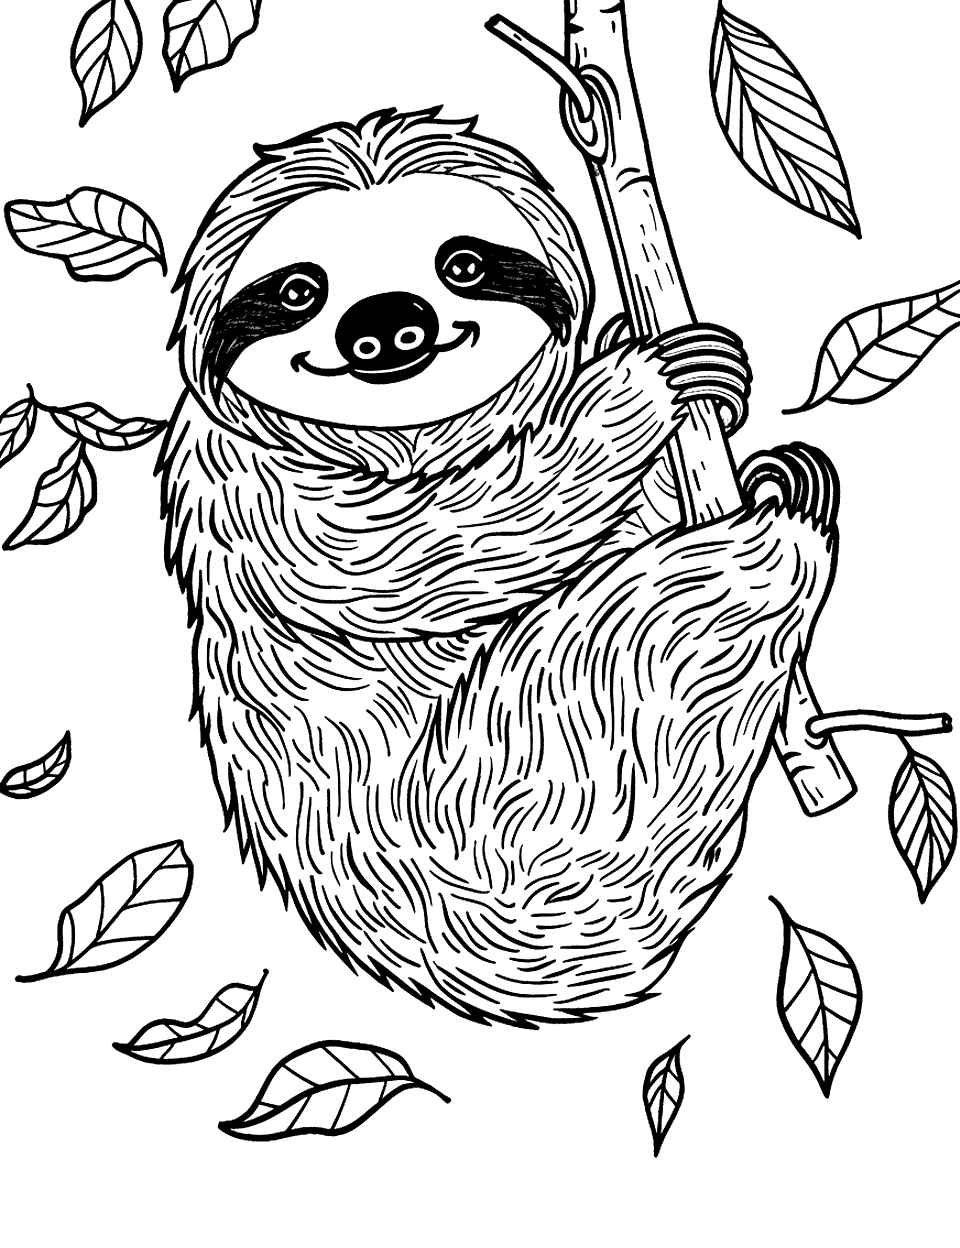 Sloth on a Windy Day Coloring Page - Leaves fluttering around as a sloth holds tightly to a swaying branch.